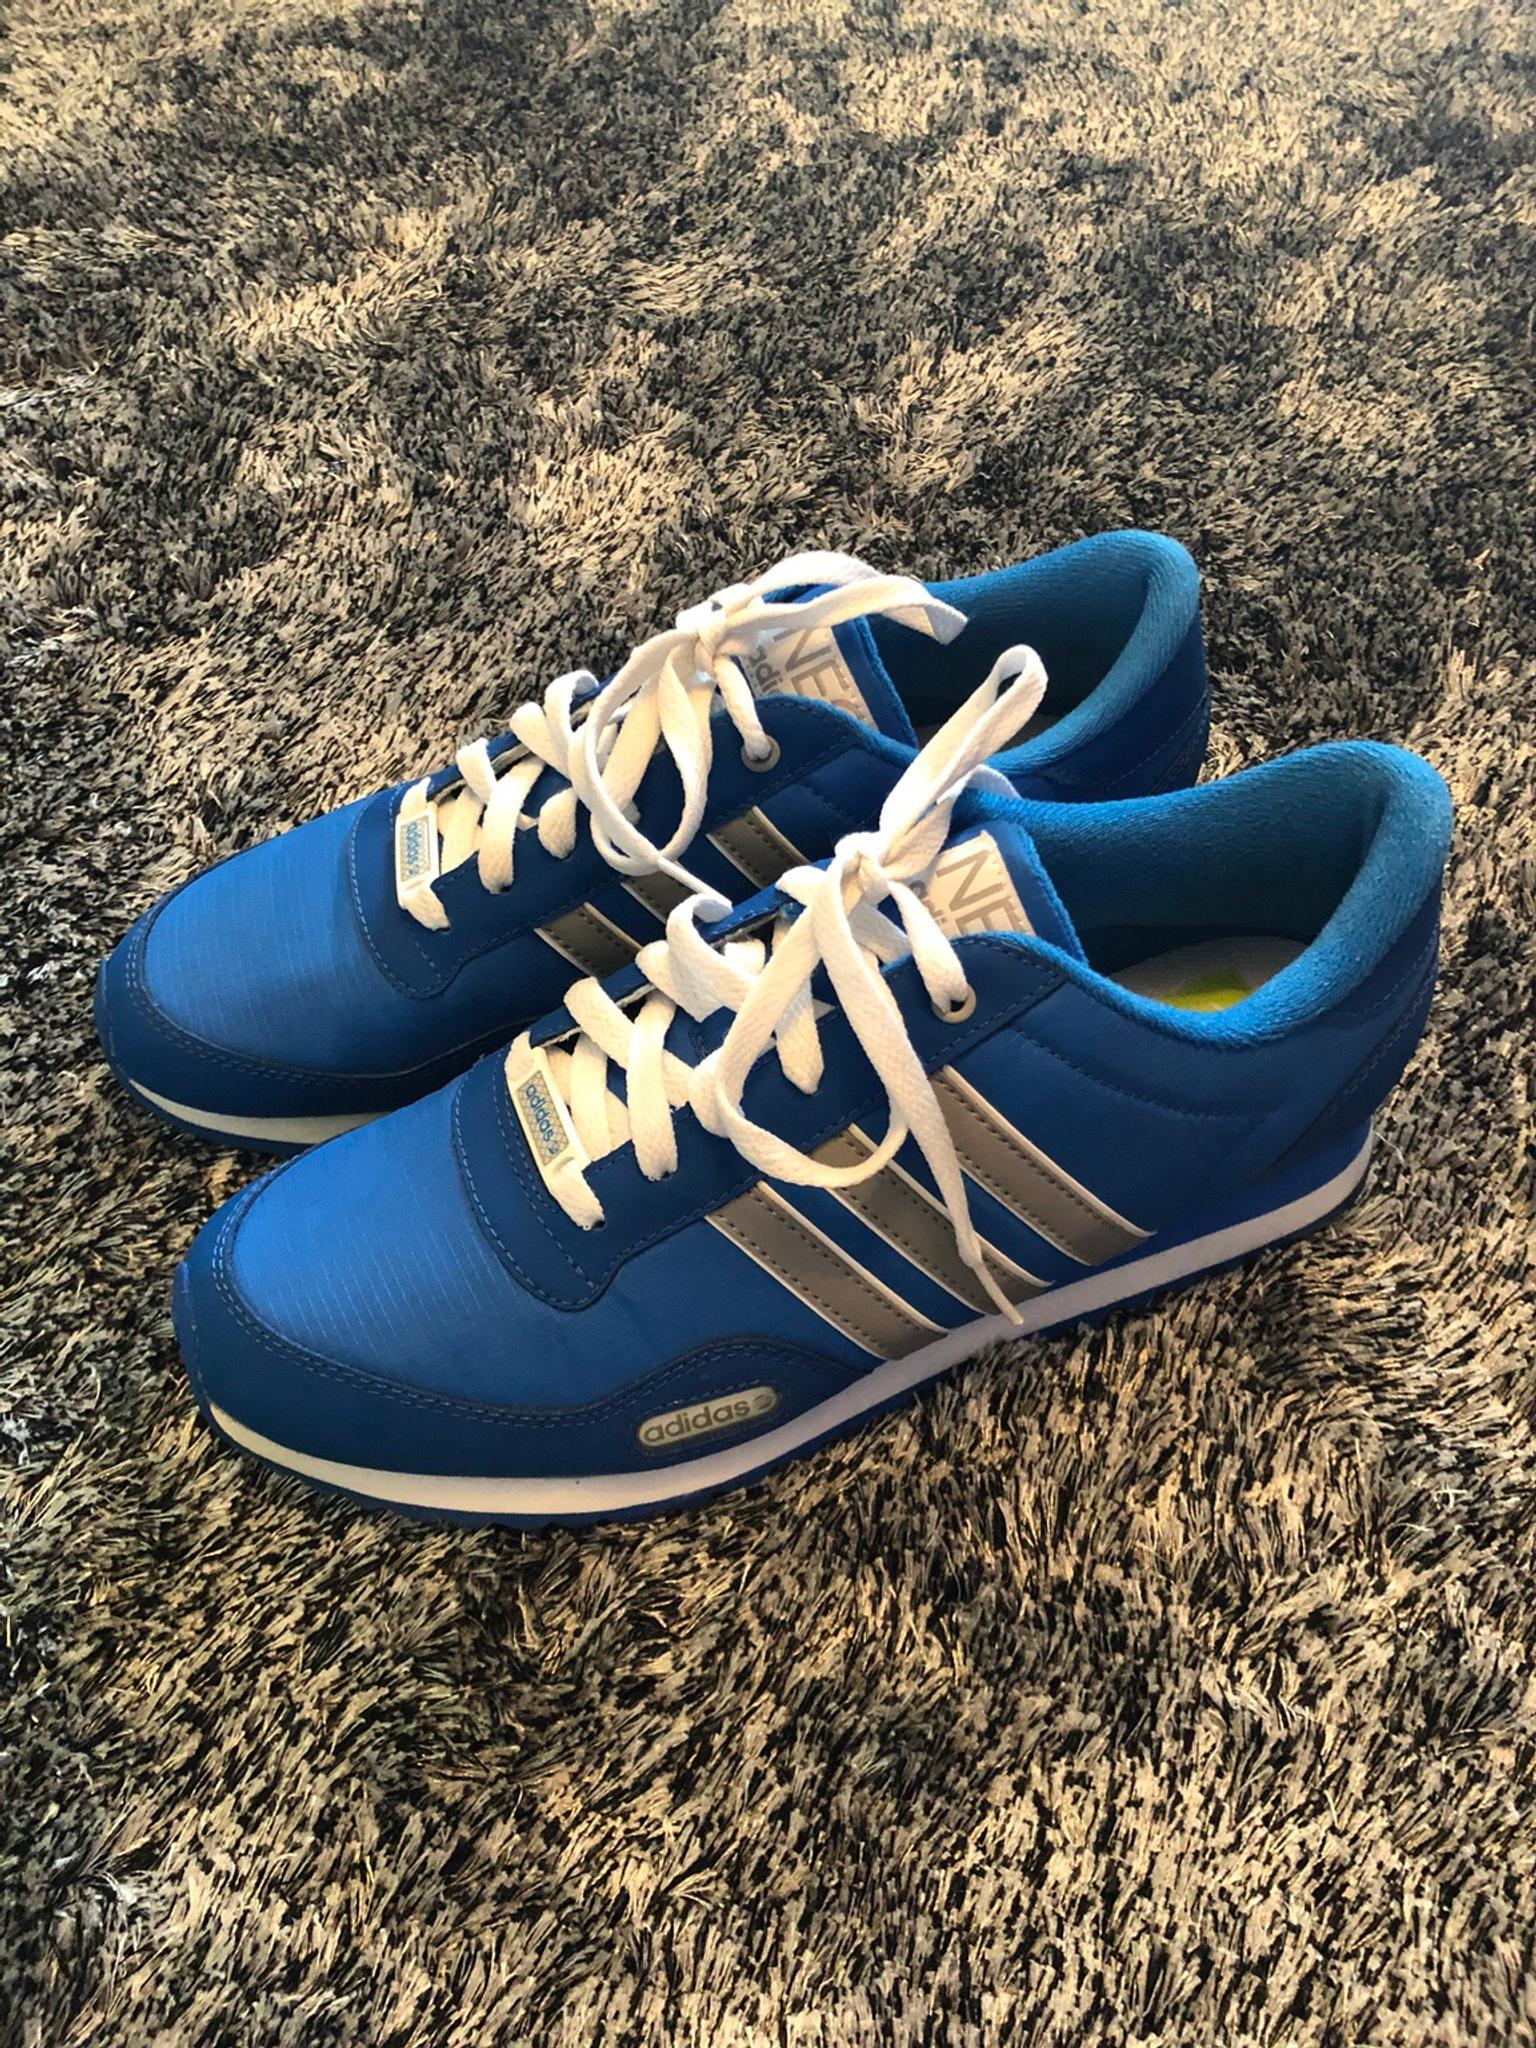 Adidas NEO trainers blue 10 in IG10 